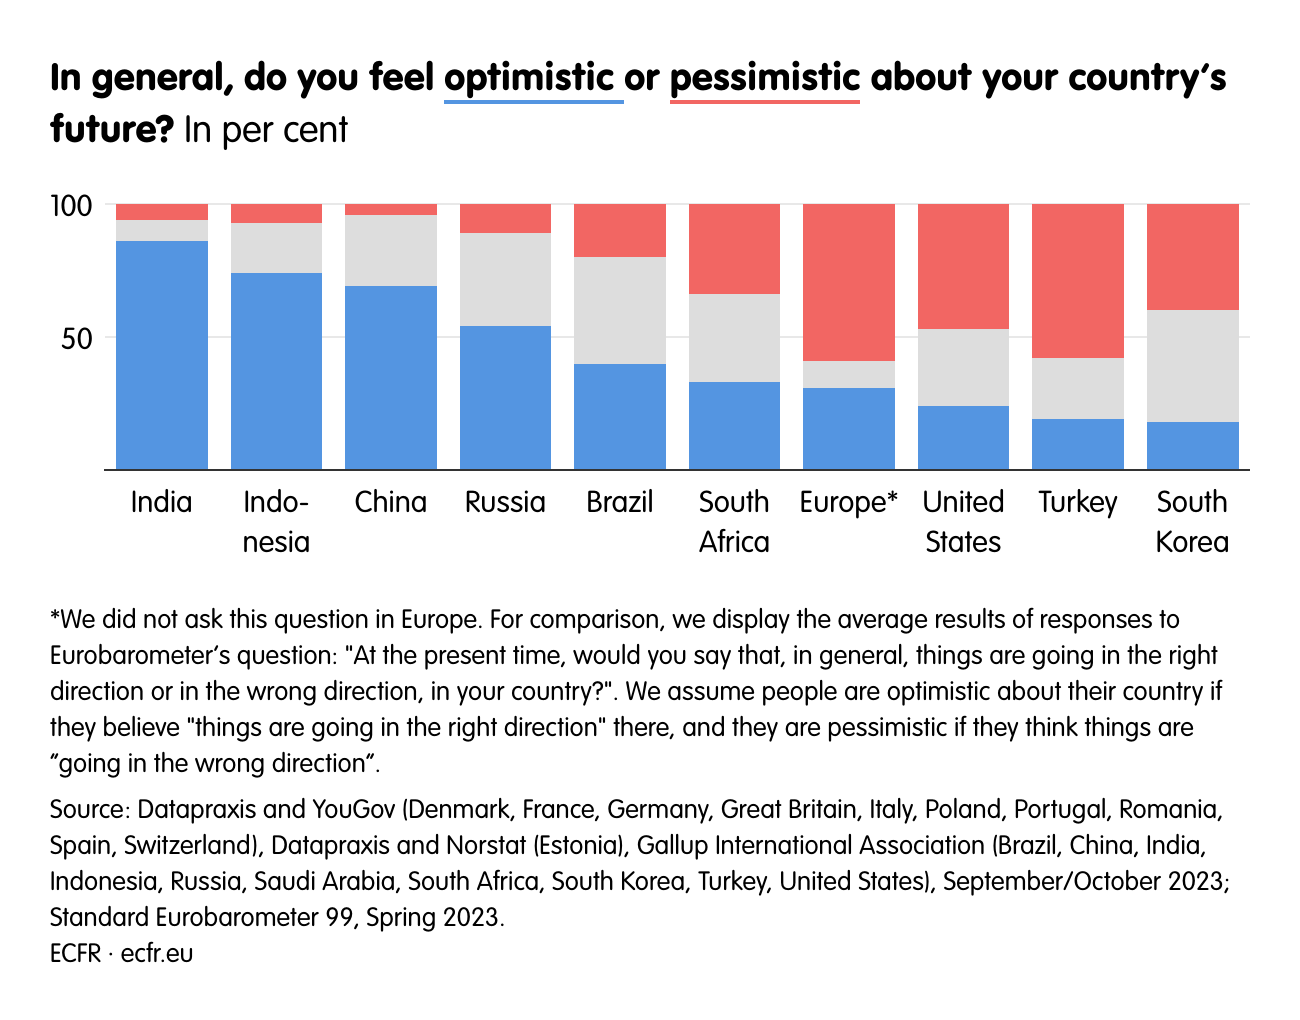 In general, do you feel optimistic  or pessimistic about your country’s future?